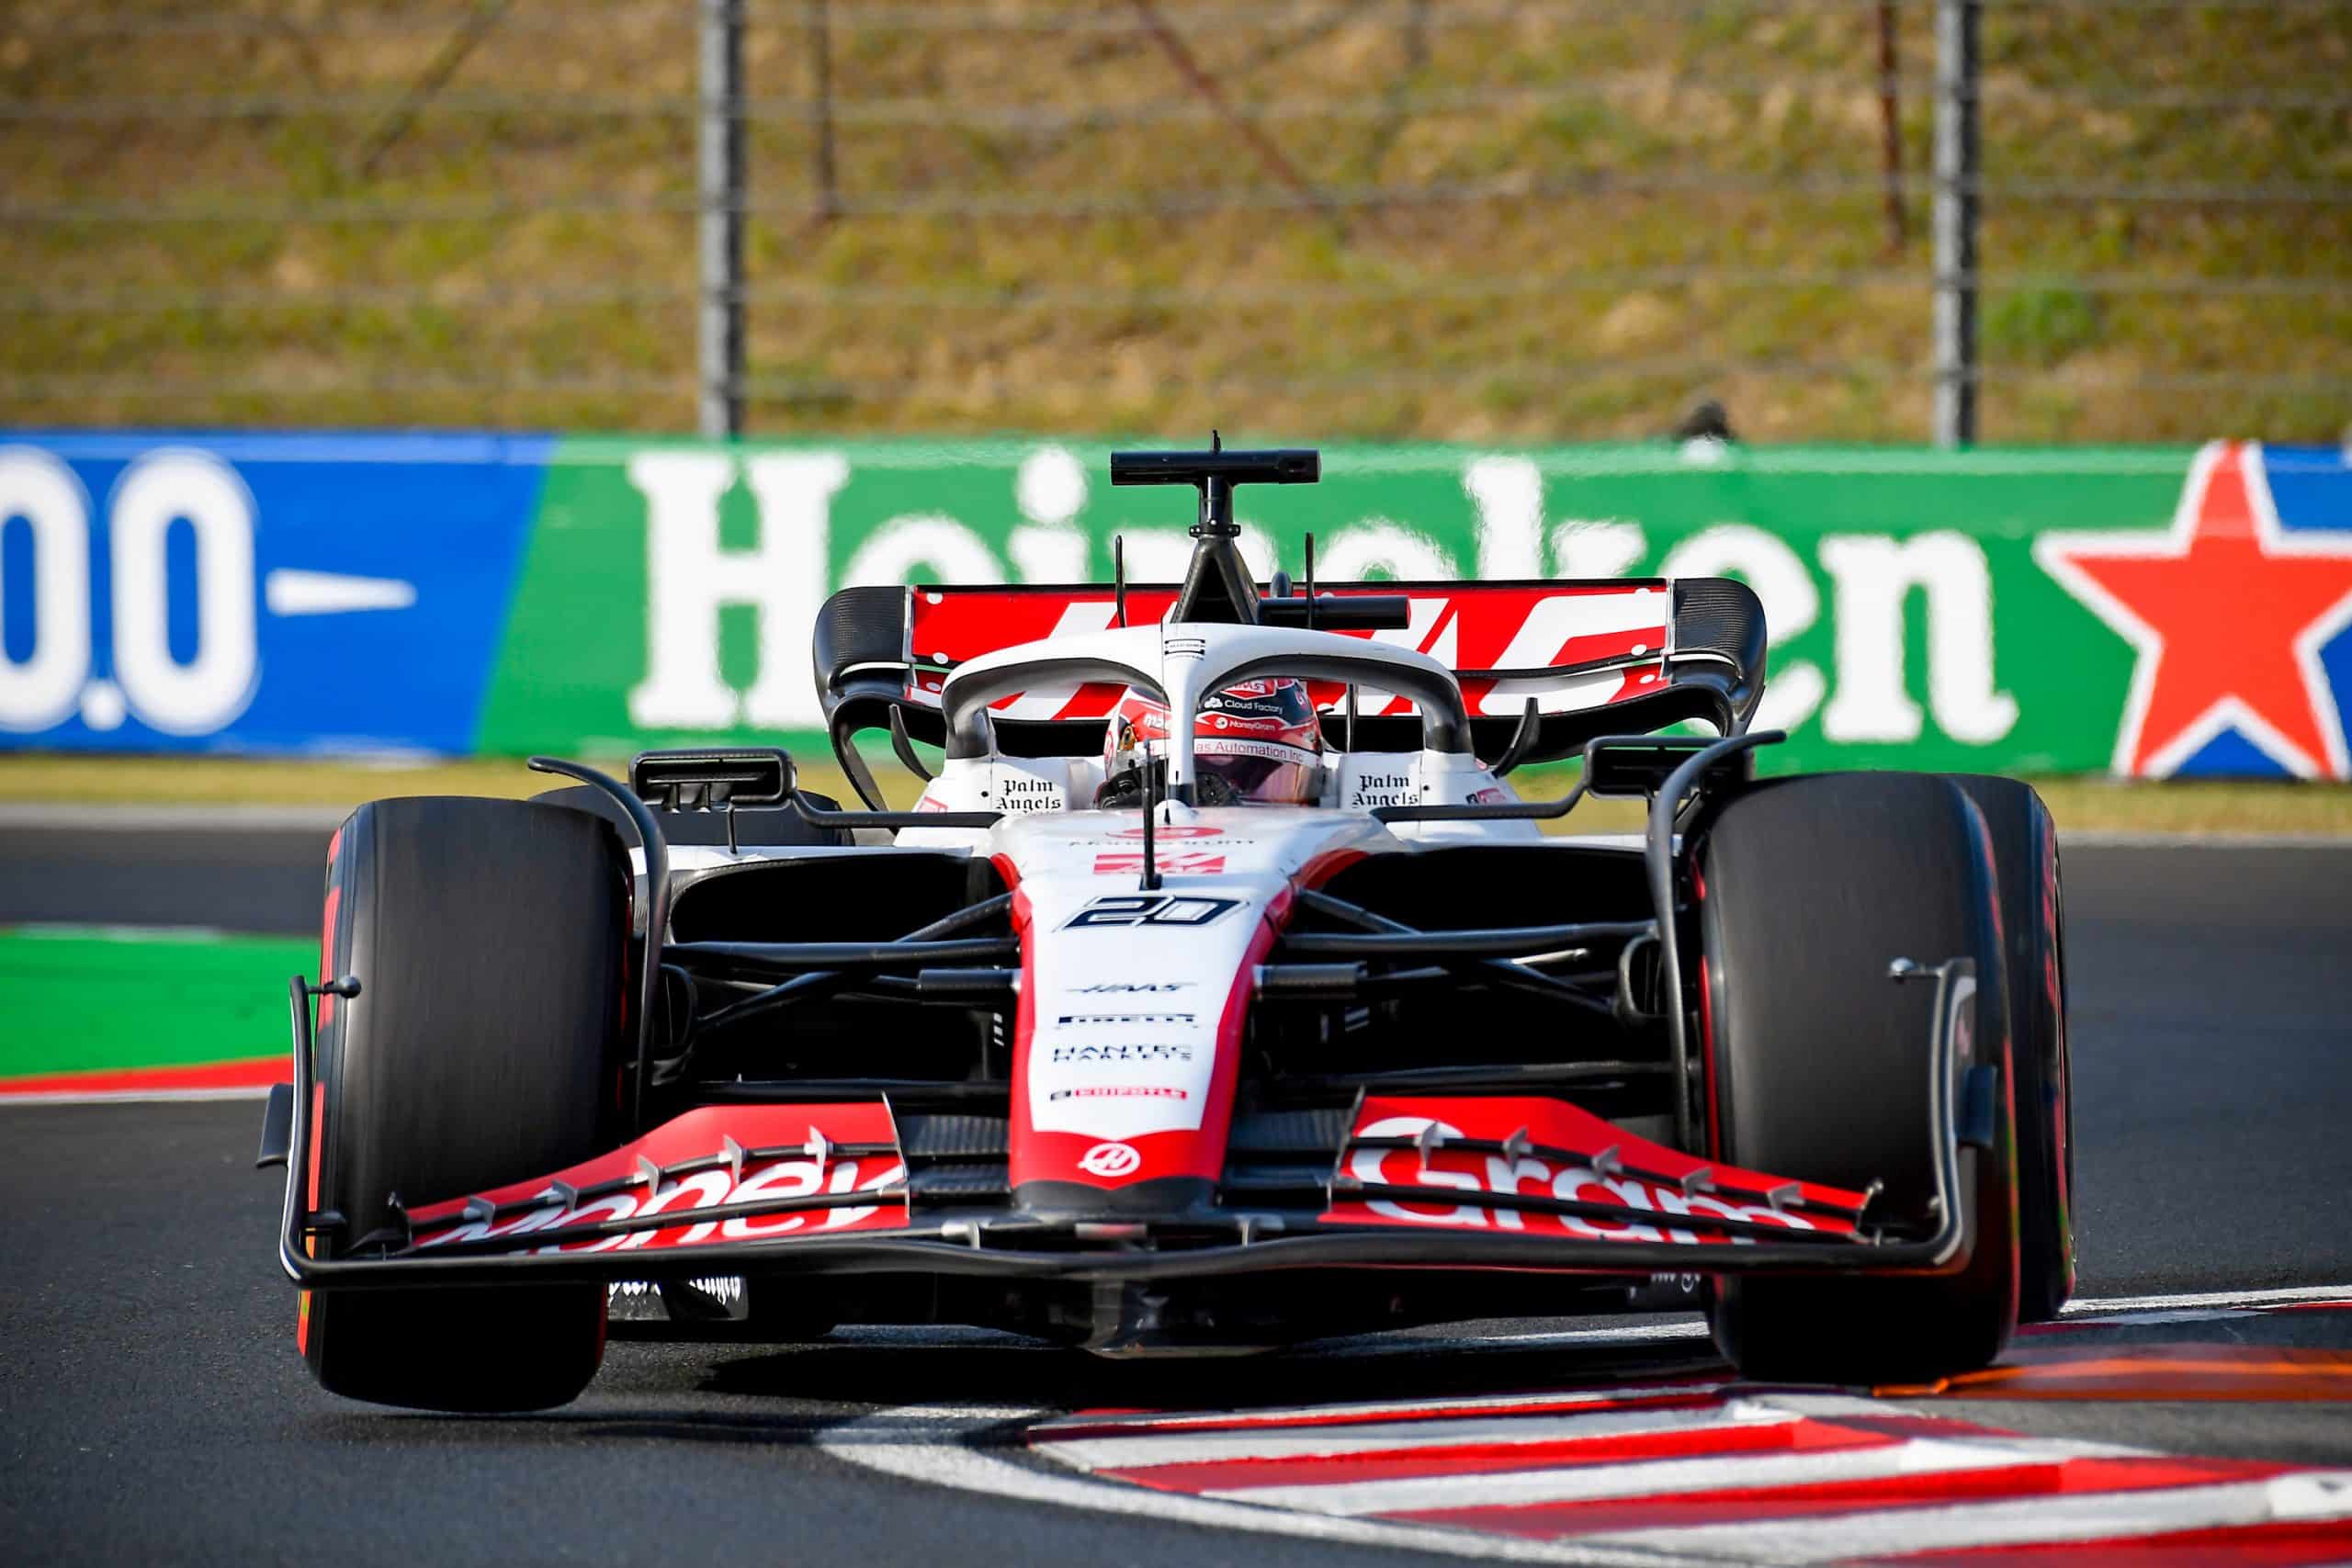 Admin by request sponsored kevin magnussen (haas-ferrari) on the curbs during practice for the 2023 hungarian grand prix at hungaroring outside budapest » admin by request » admin by request